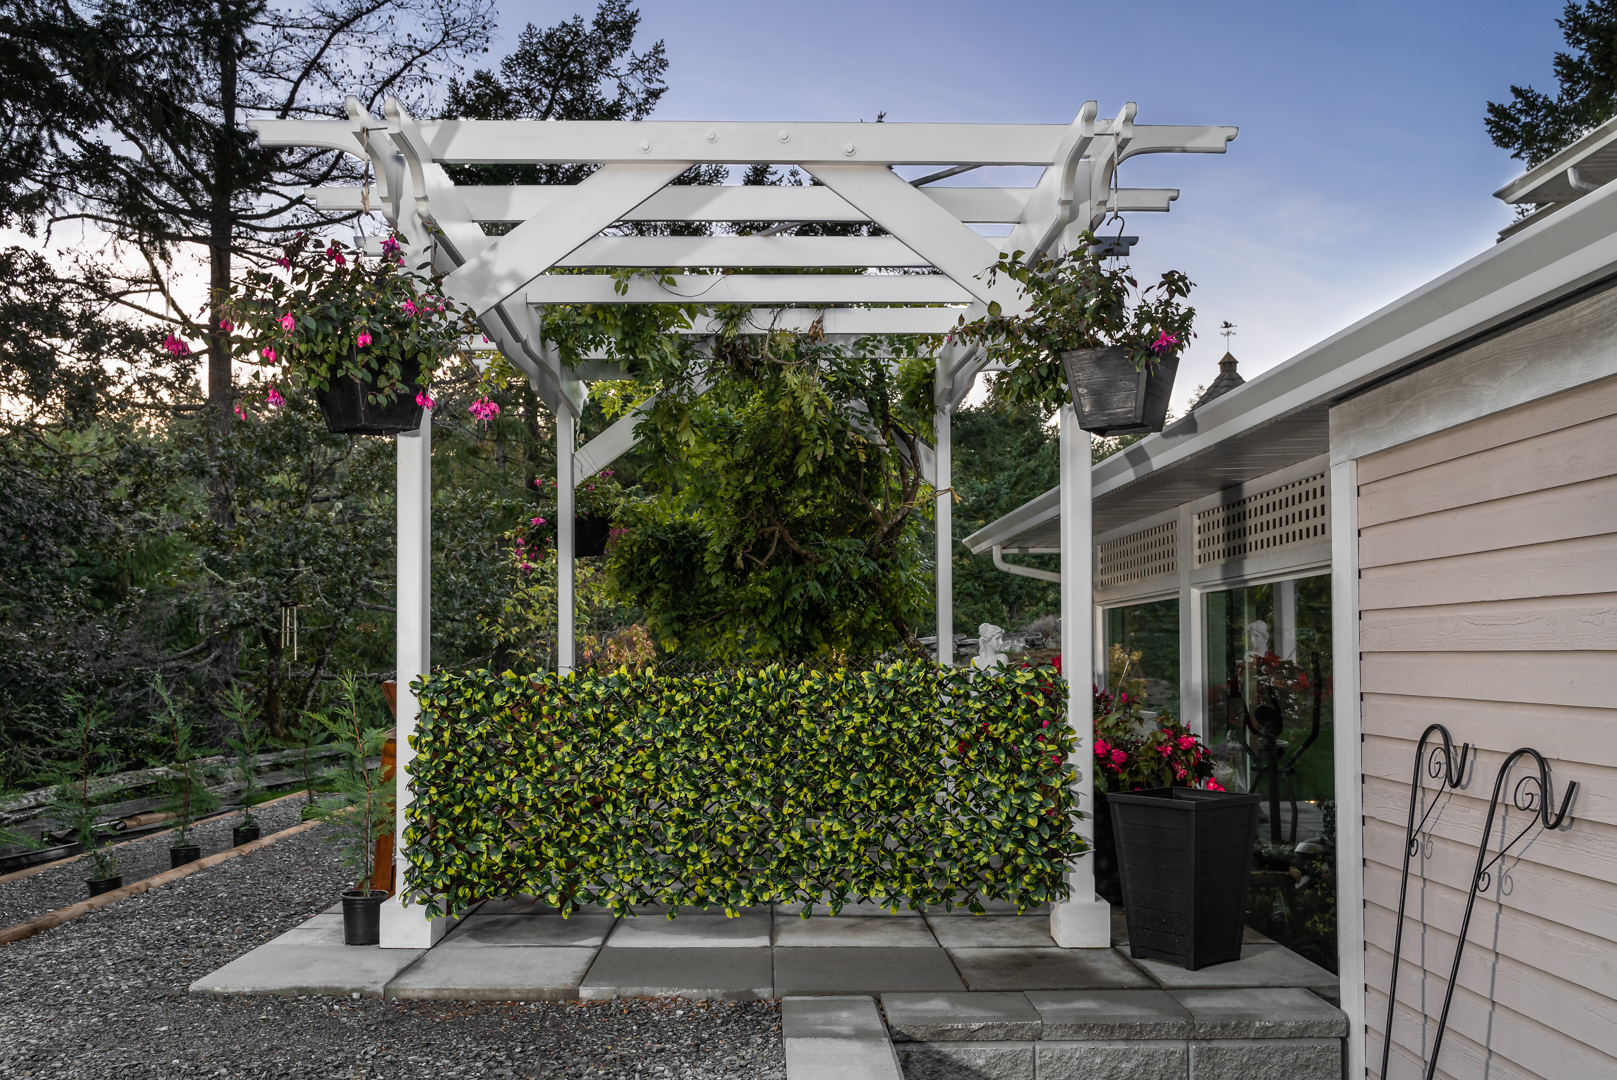 Pergola behind home with hanging plants